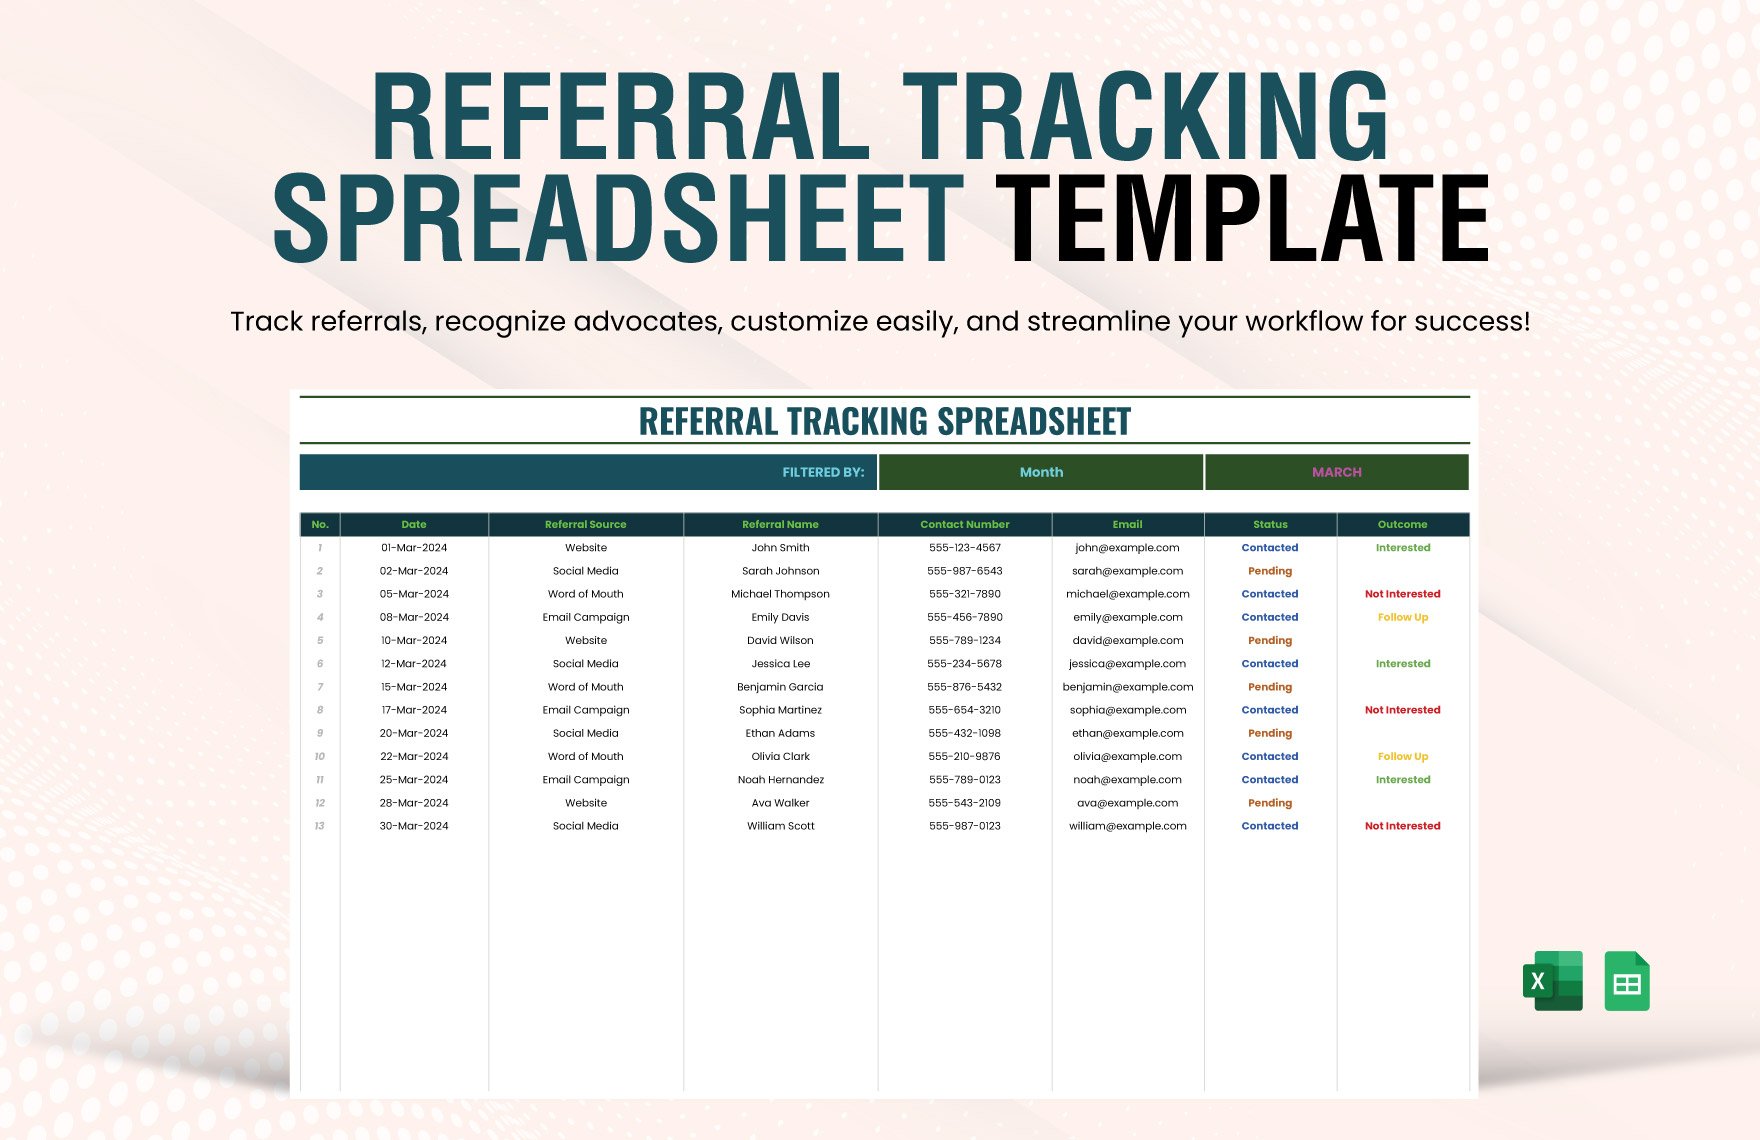 Referral Tracking Spreadsheet Template in Excel, Google Sheets